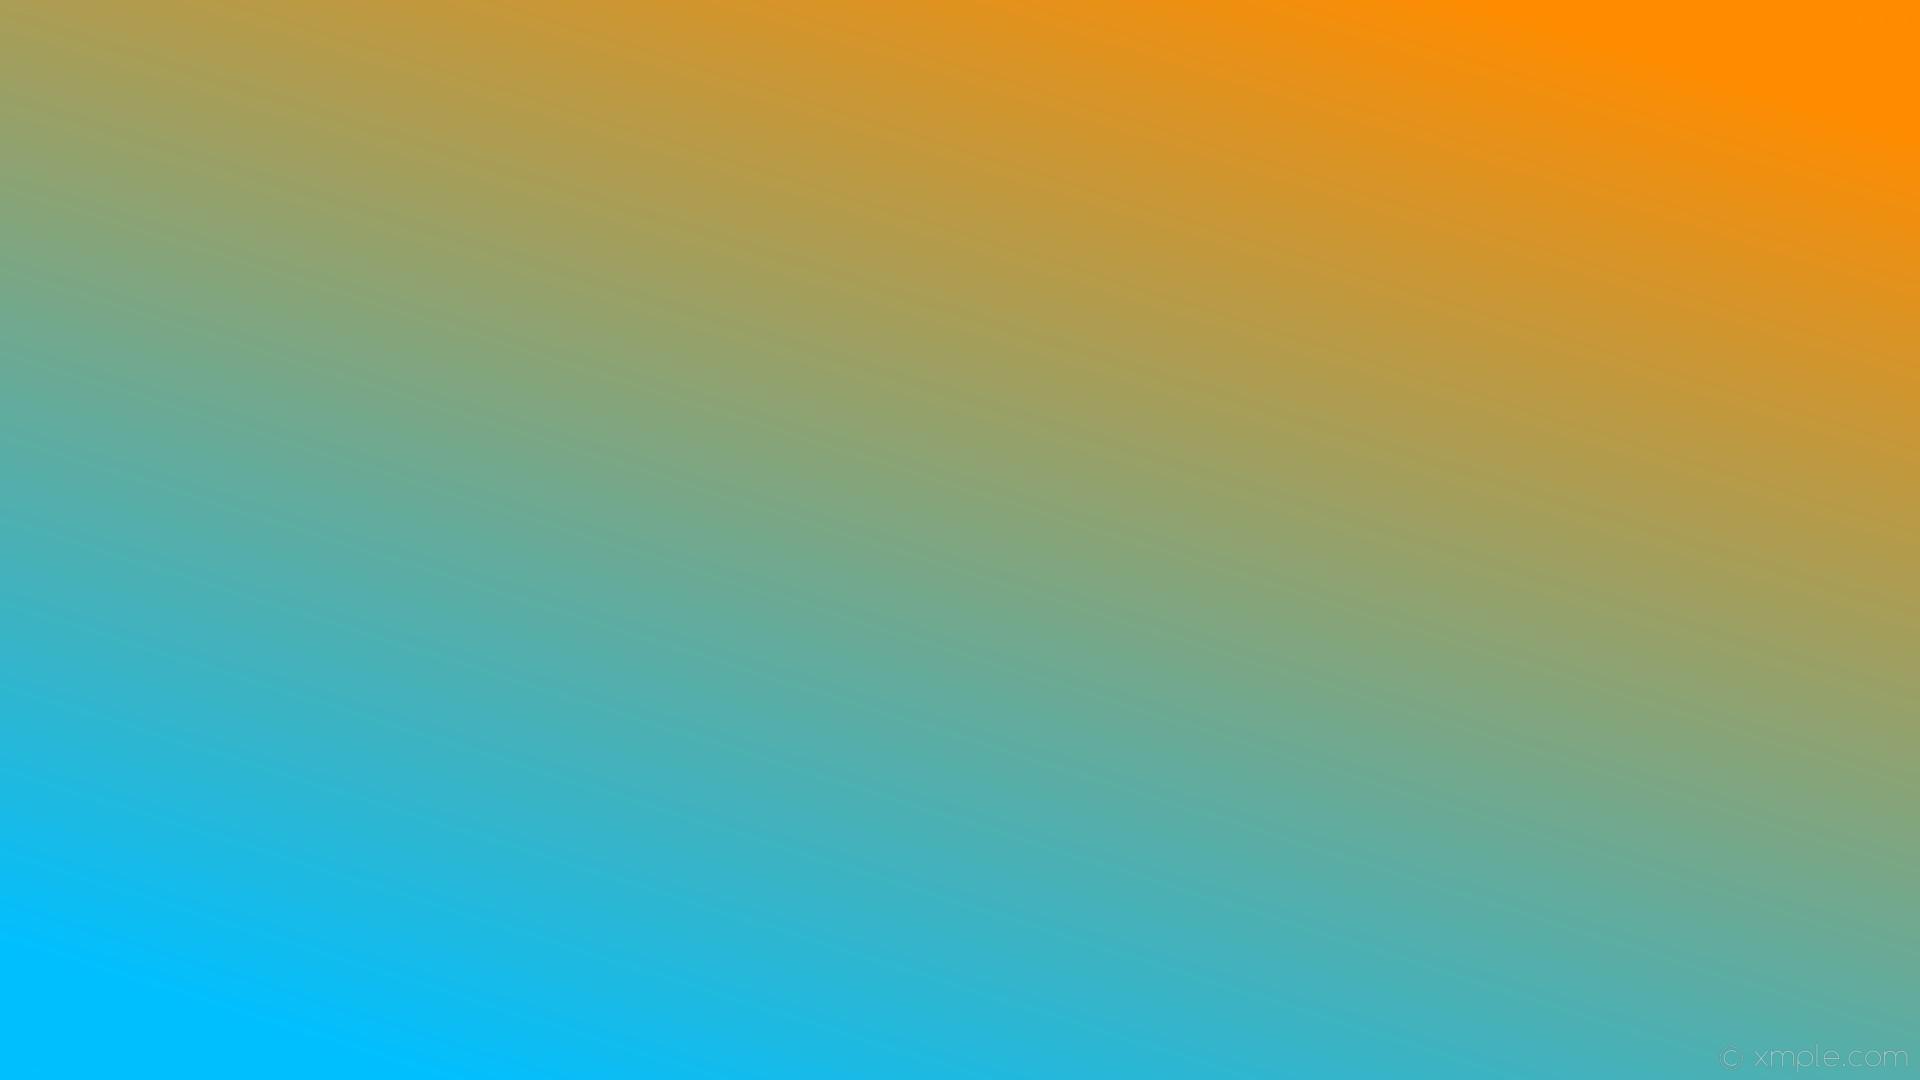 Turquoise And Orange Wallpapers Top Free Turquoise And Orange Backgrounds Wallpaperaccess